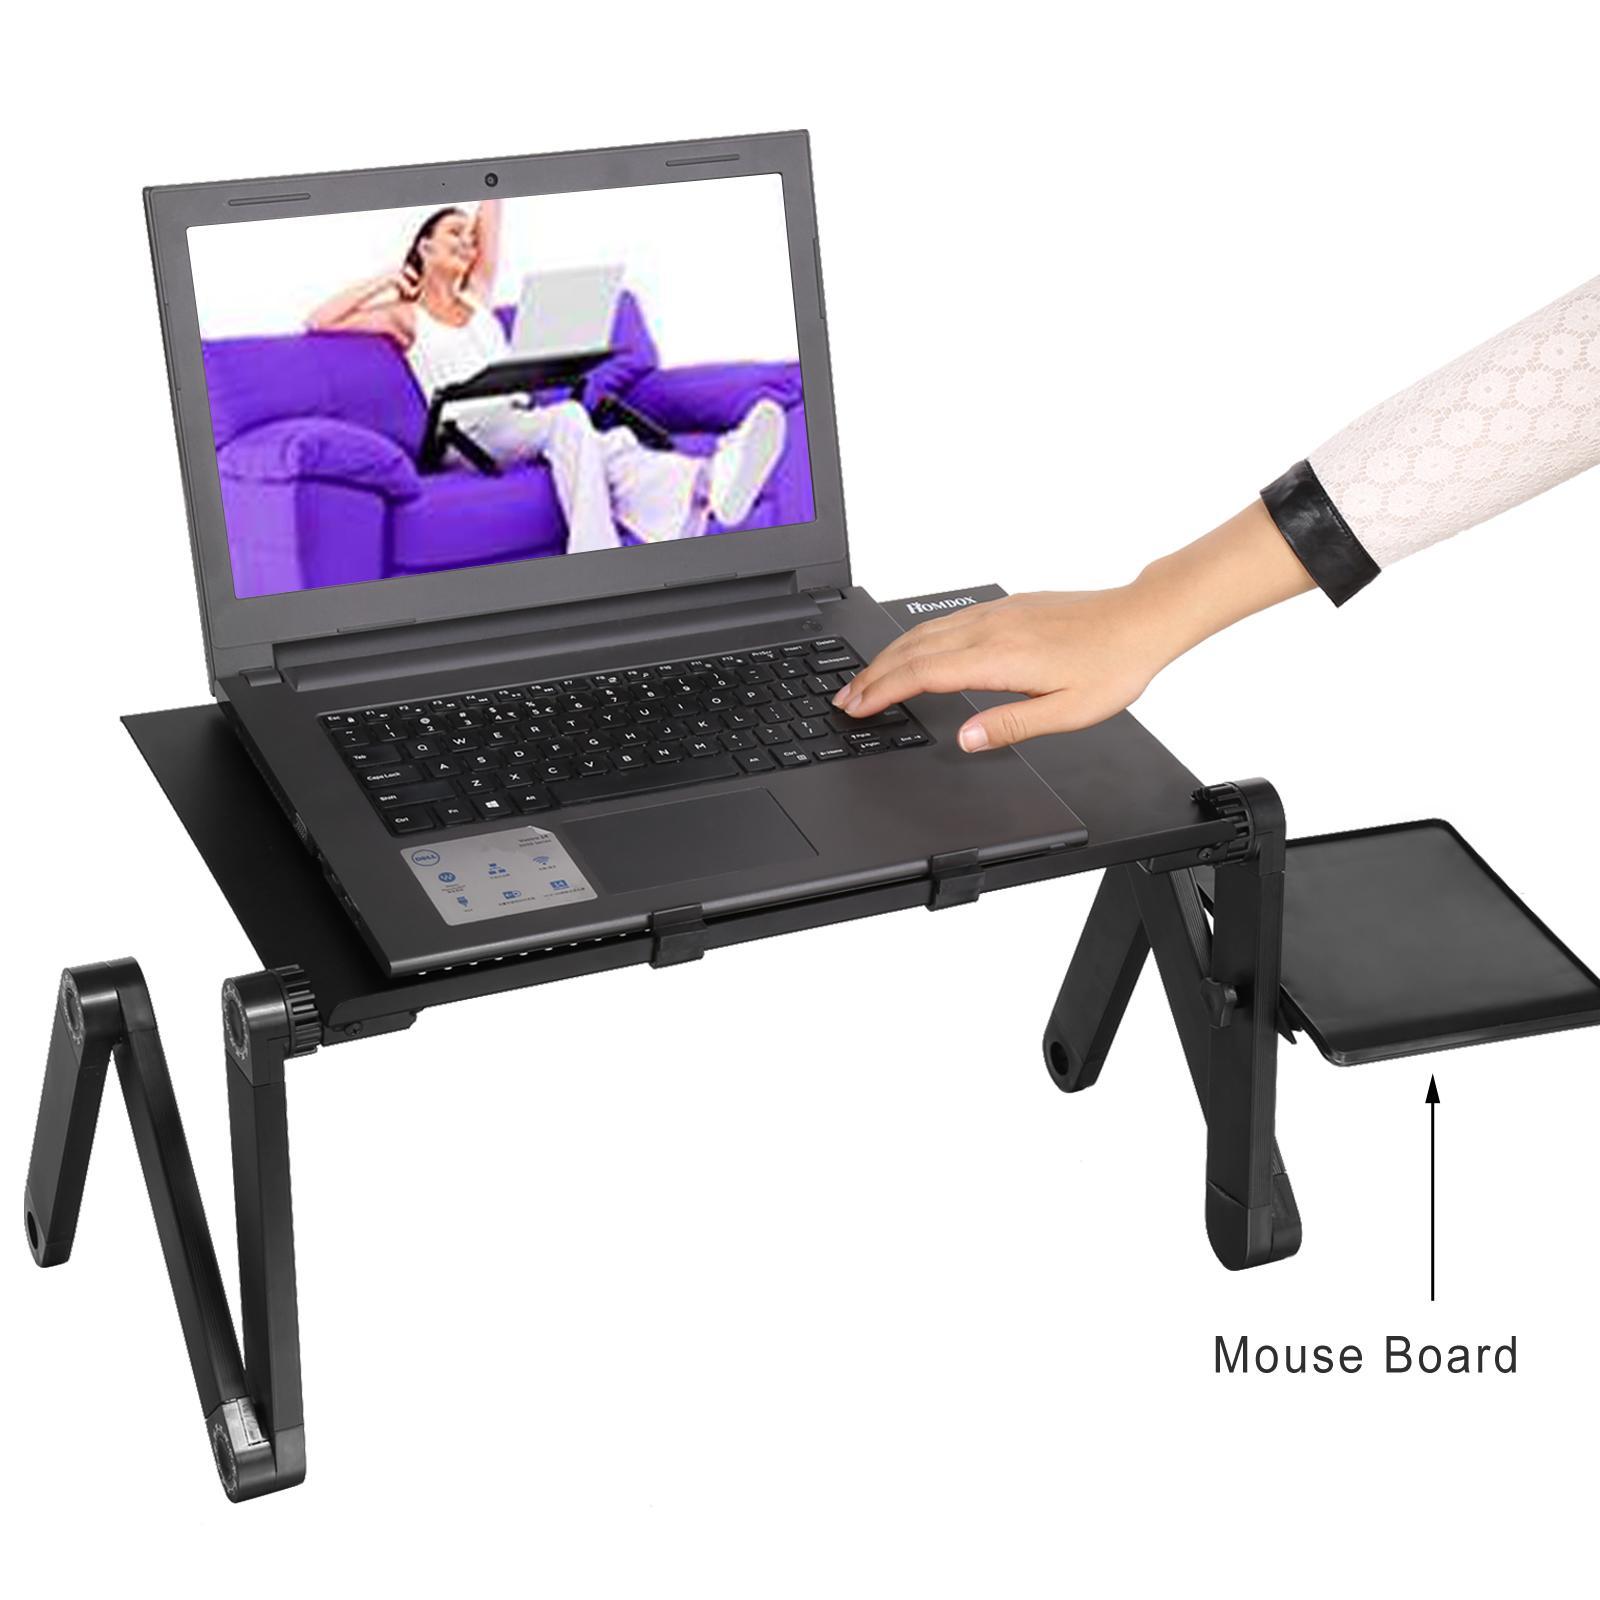 Portable Laptop Table Stand with Mouse Board Cooling Fan Pad Fully Adjustable-Light Weight Aluminum-Black Bed Tray Desk Book HPPY - image 4 of 8